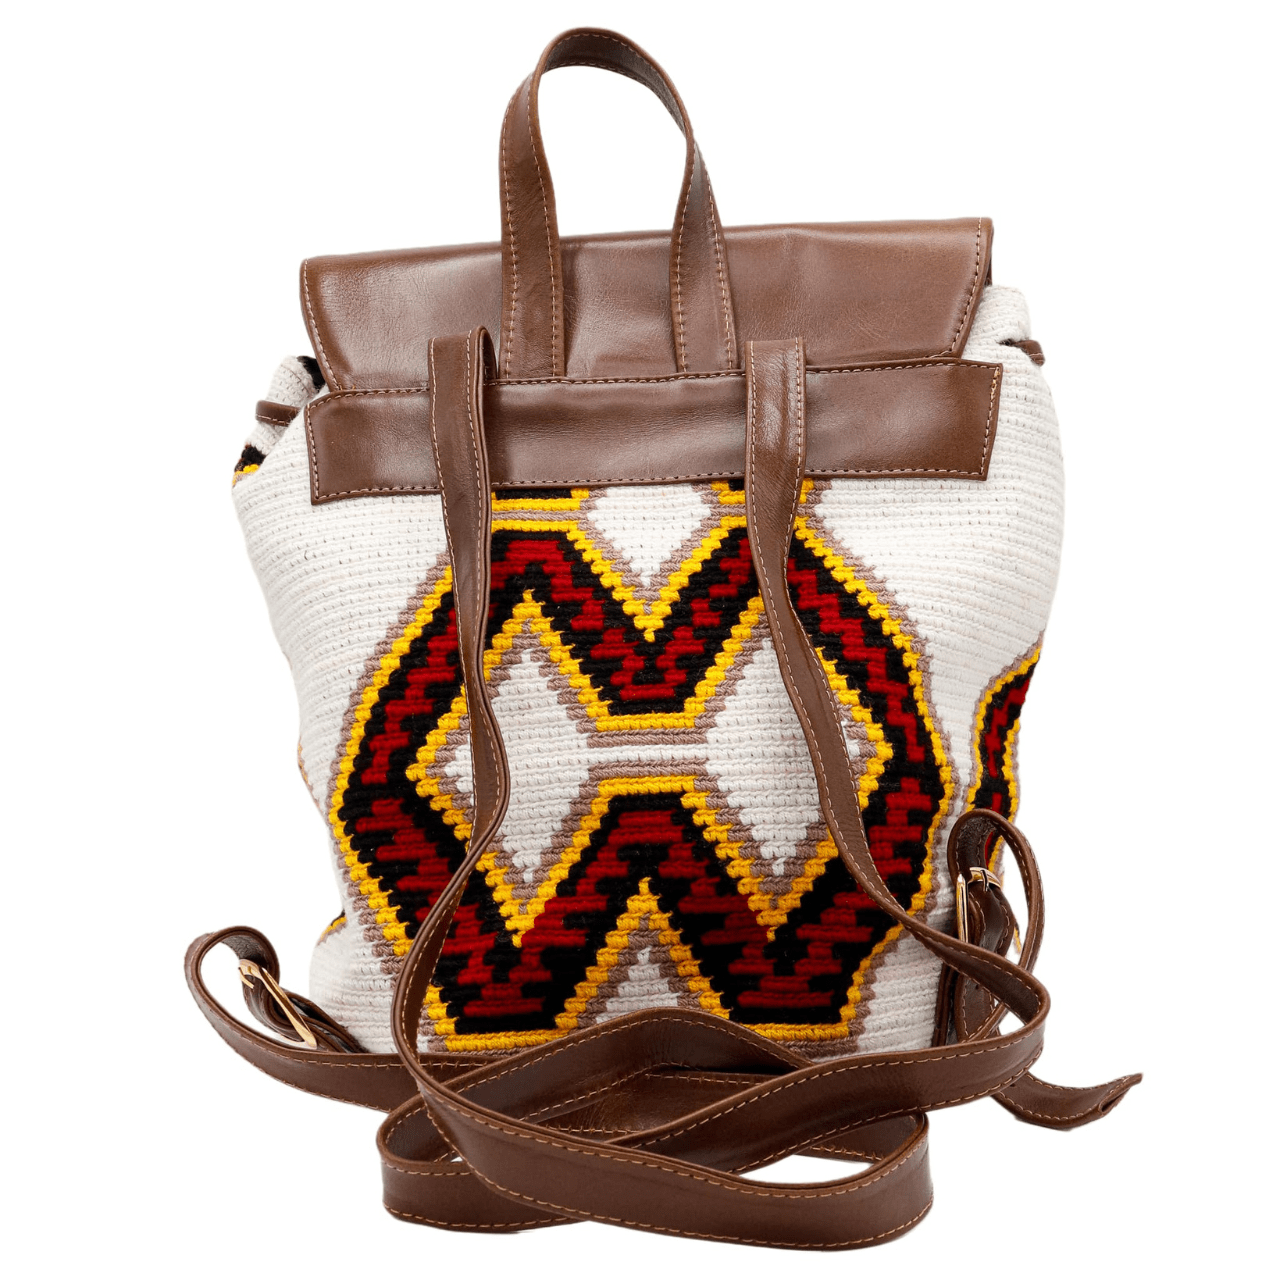  Nini backpack featuring a Wayuu body in a vibrant combination of white, red, yellow, and black, adorned with stylish accents in genuine leather. The backpack showcases a convenient side pocket and a secure double closing mechanism.